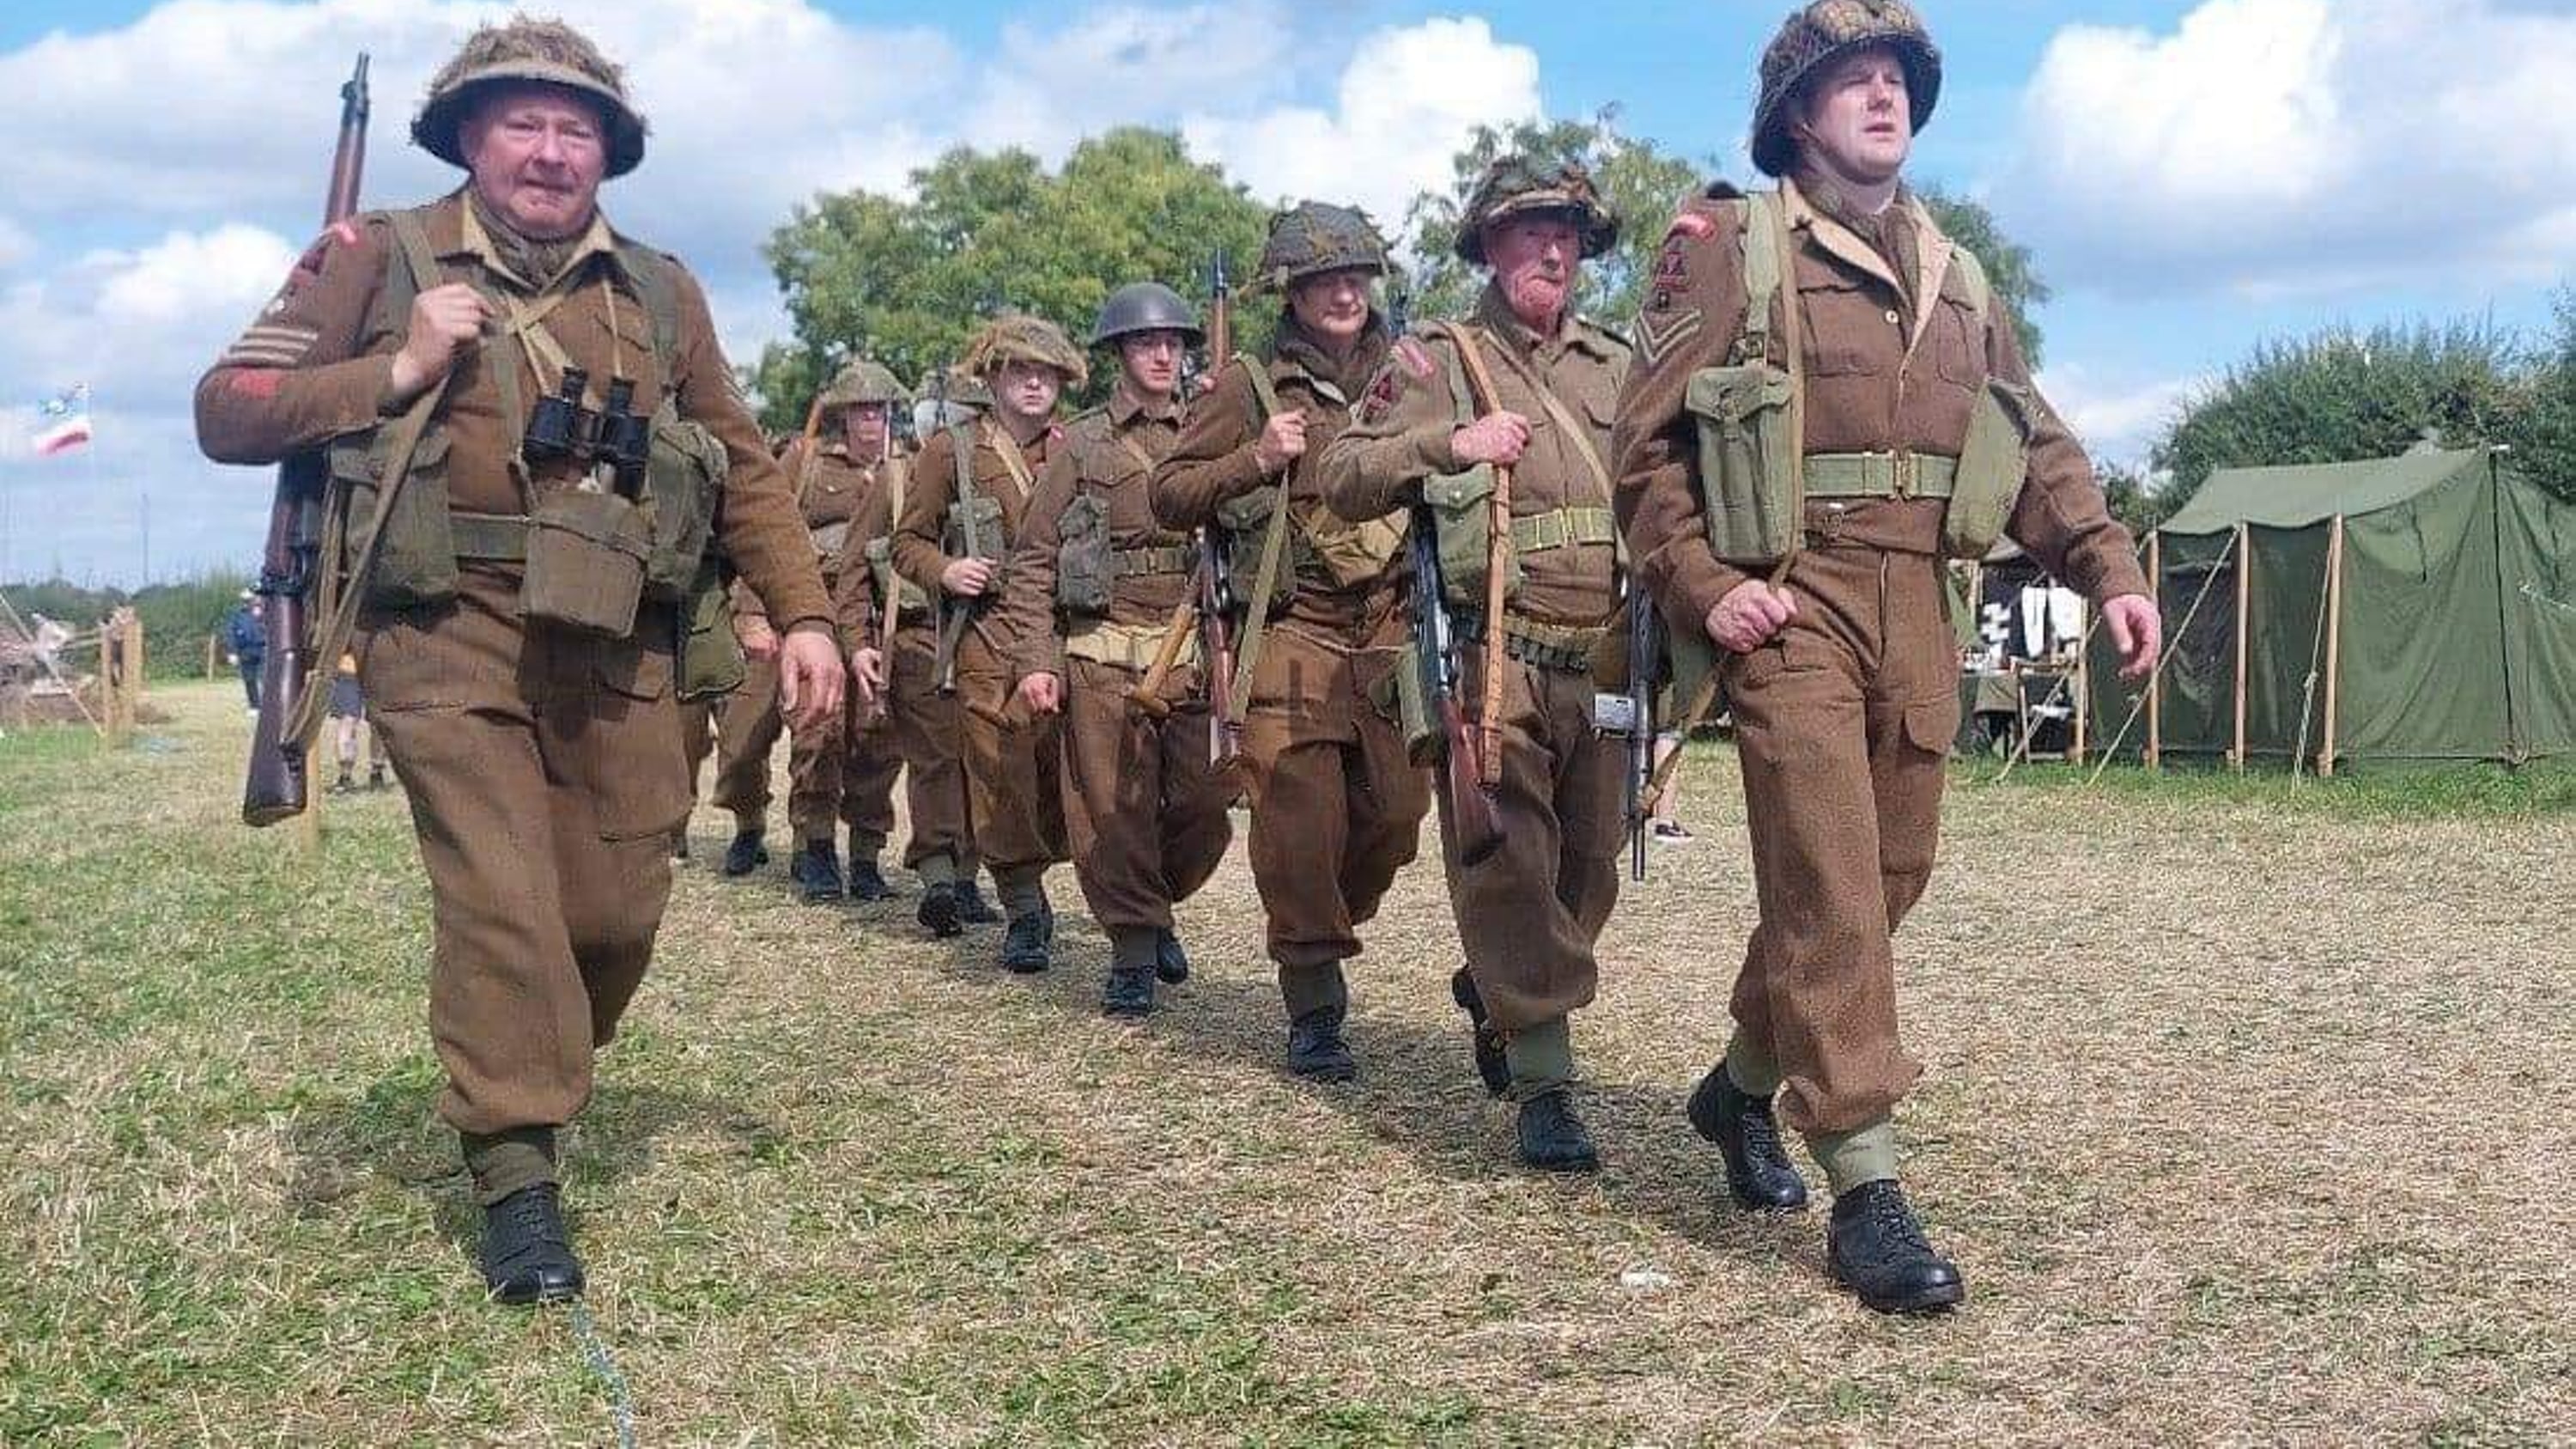 East Yorkshire Regiment Living Group members portraying the Second Battalion of the East Yorkshire regiment during the Second World War